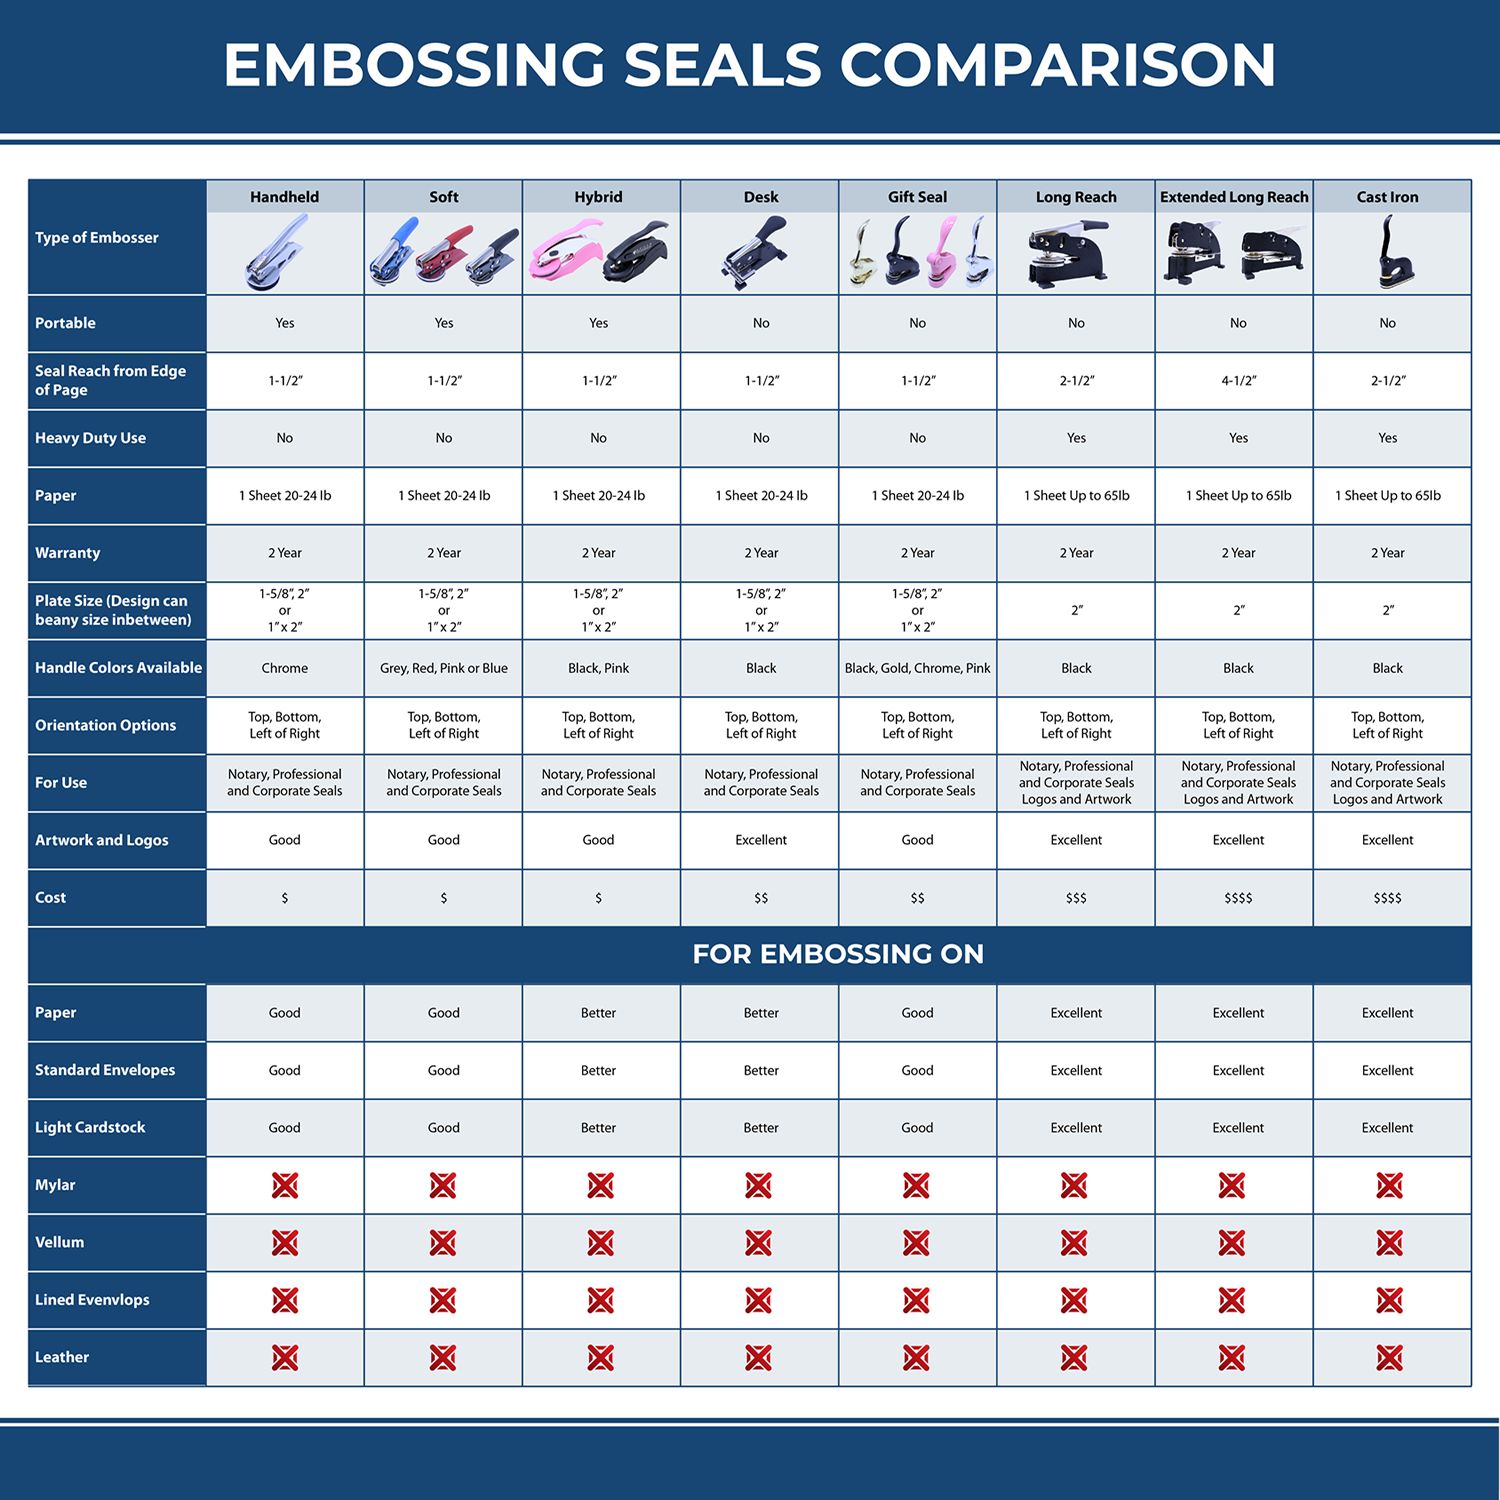 A comparison chart for the different types of mount models available for the Long Reach Puerto Rico PE Seal.